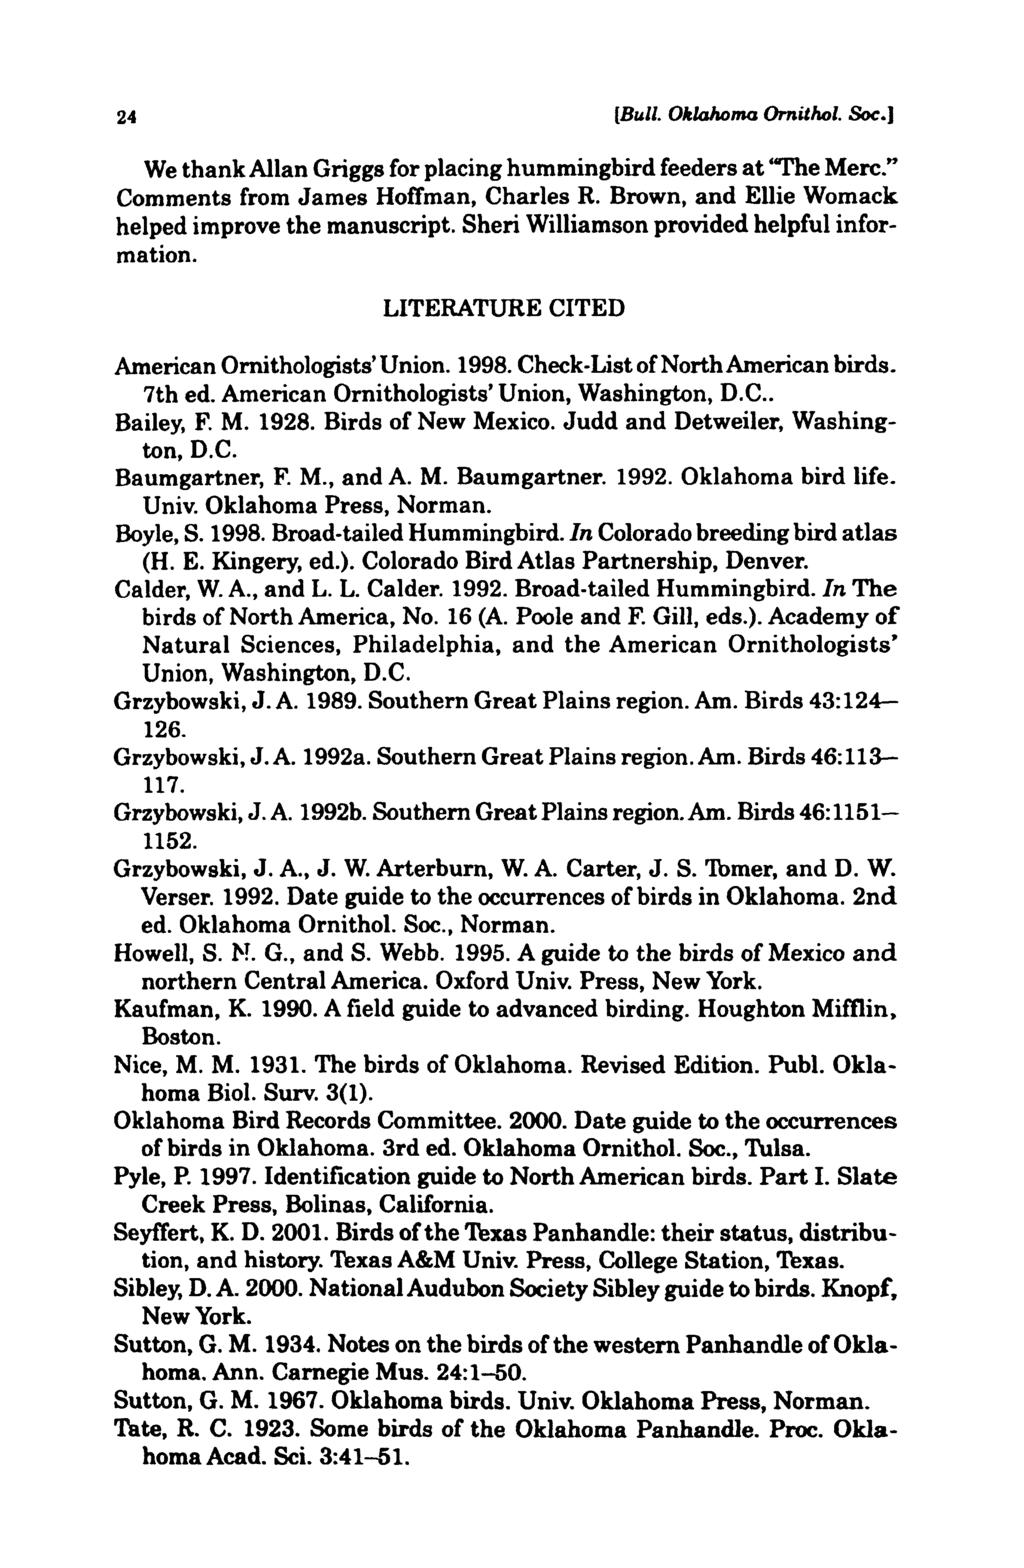 24 [Bull. Okluhoma Omithol. Soc. J We thank Allan Griggs for placing hummingbird feeders at "The Merc." Comments from James Hoffman, Charles R. Brown, and Ellie Womack helped improve the manuscript.